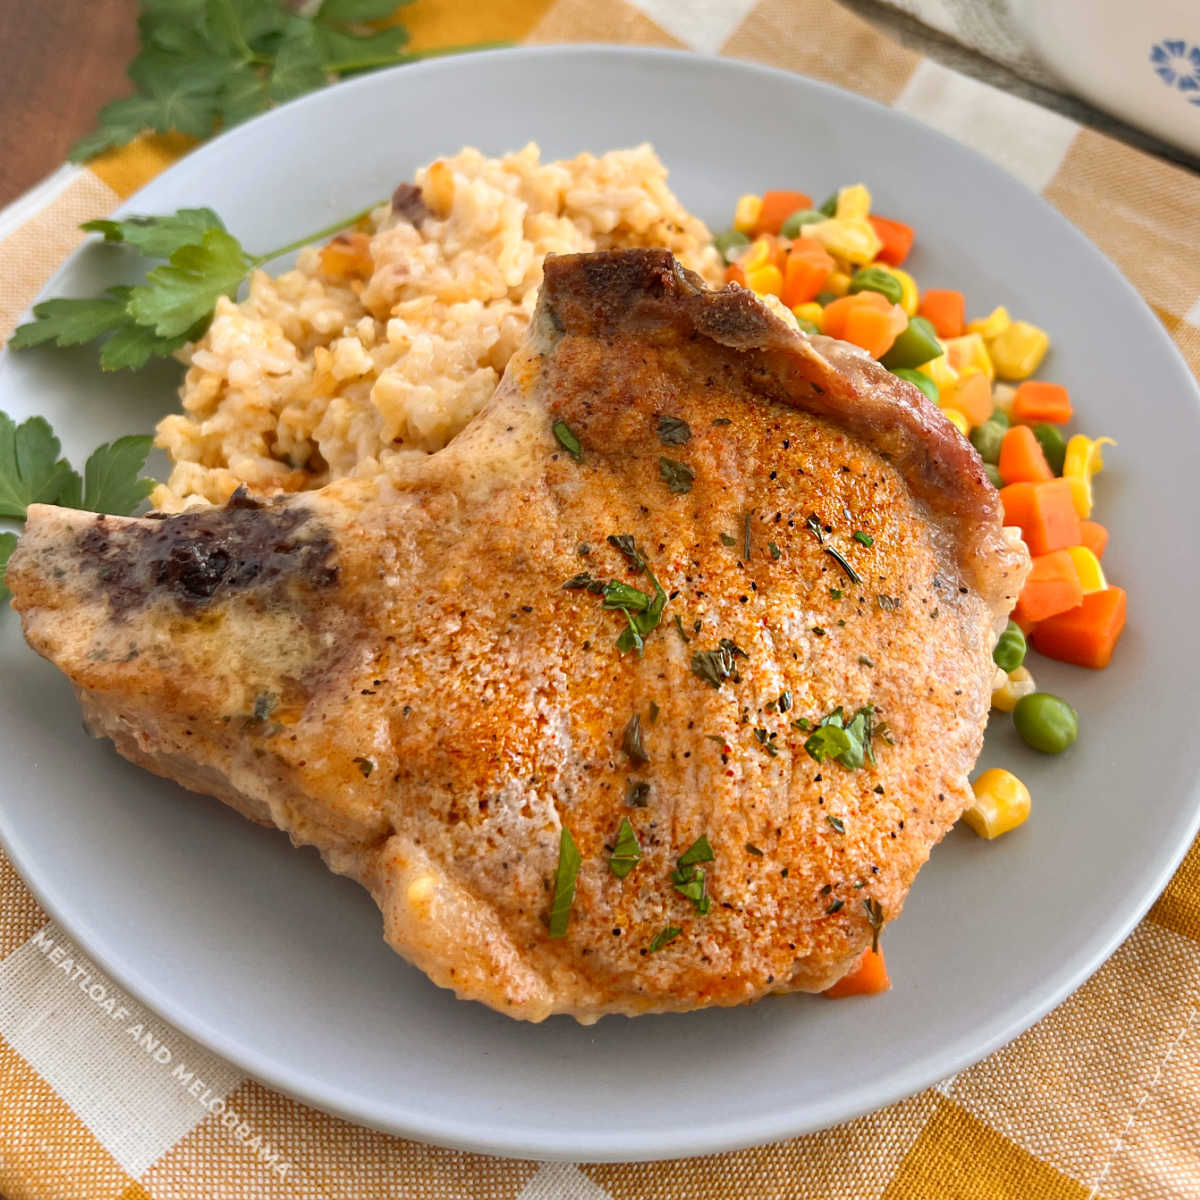 Mom's Baked Pork Chops and Rice Recipe